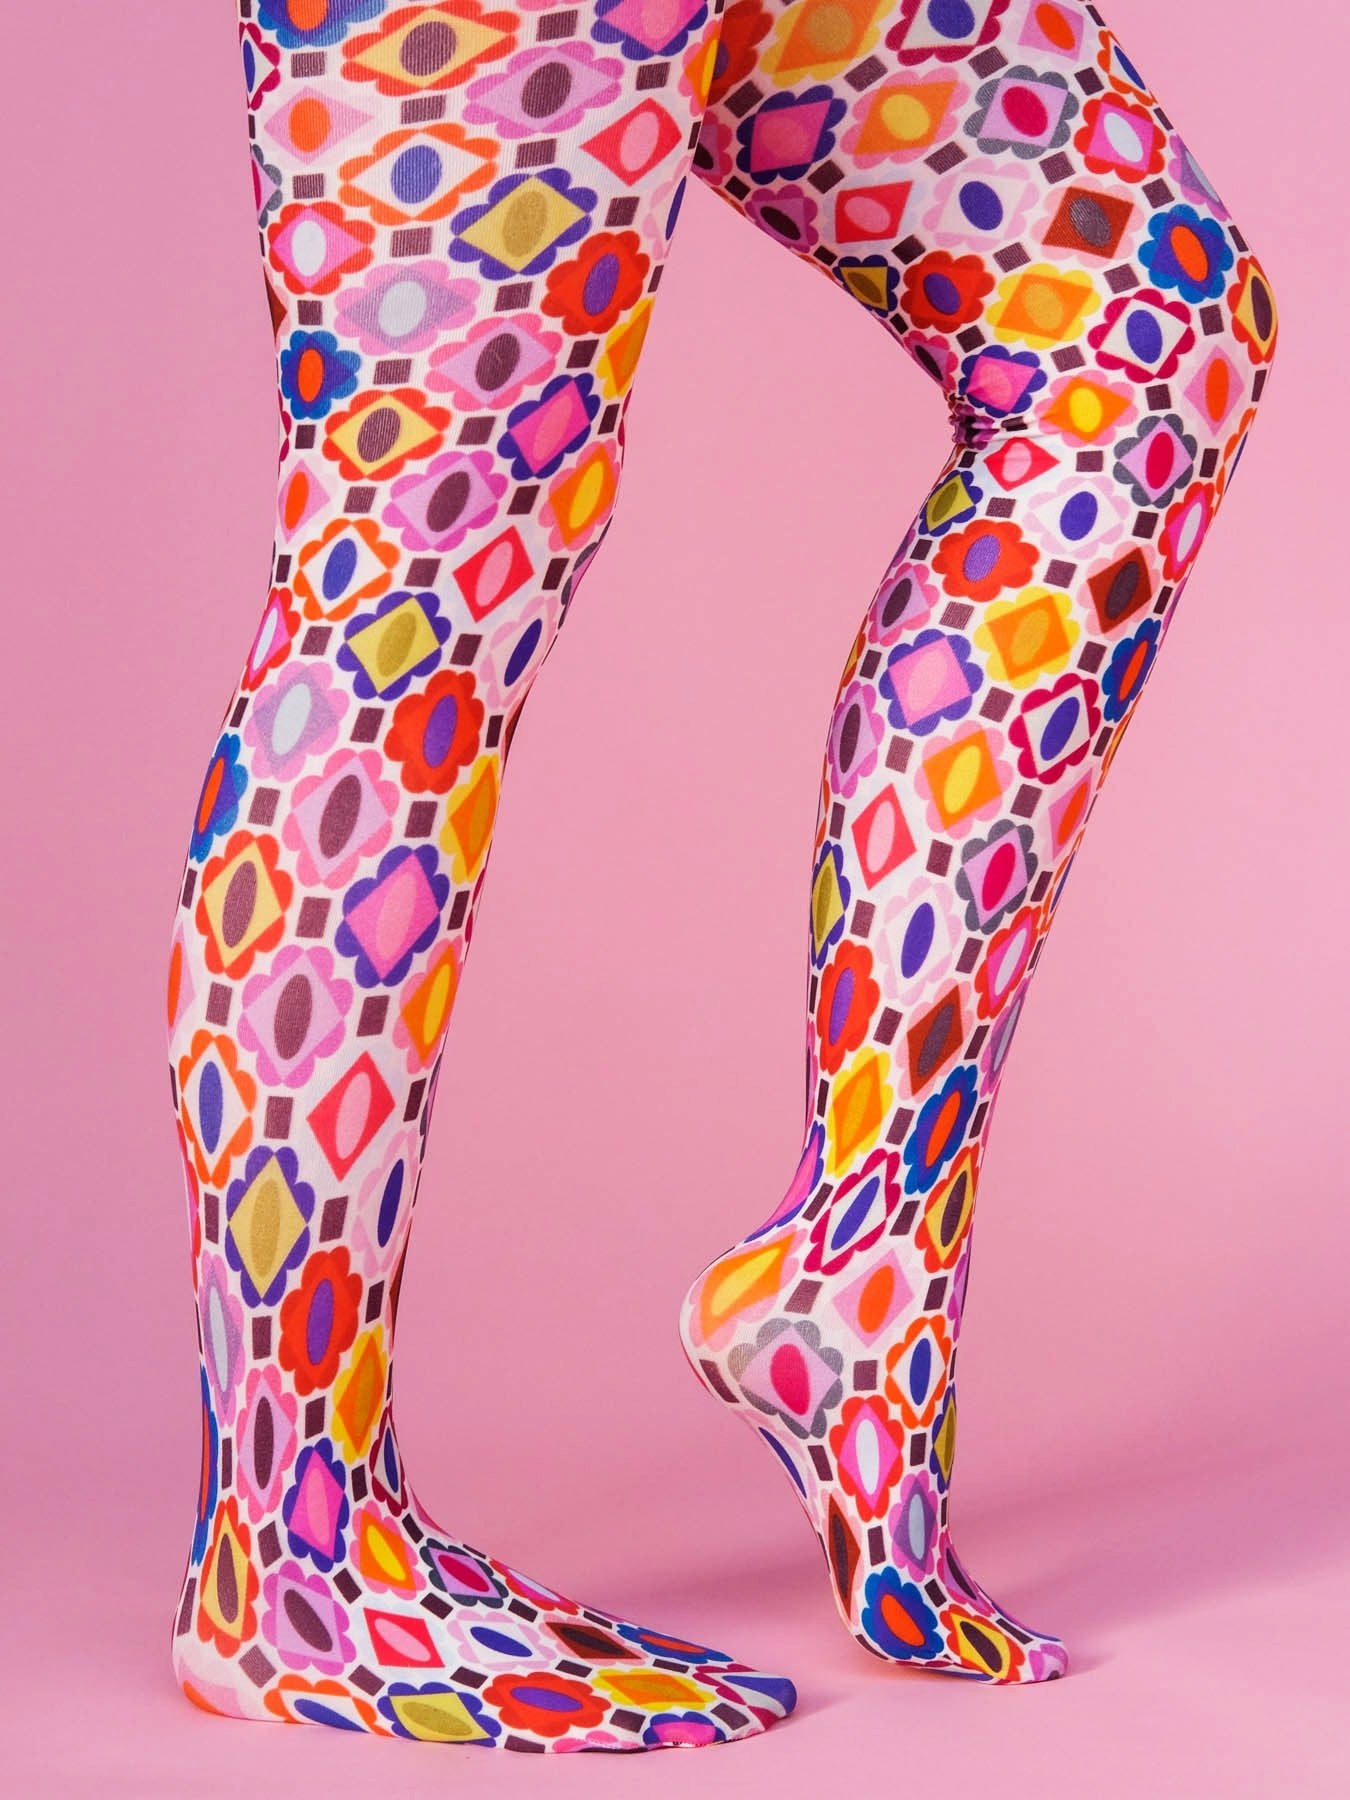 This item is unavailable -   Patterned tights outfit, Colored tights  outfit, Polka dot tights